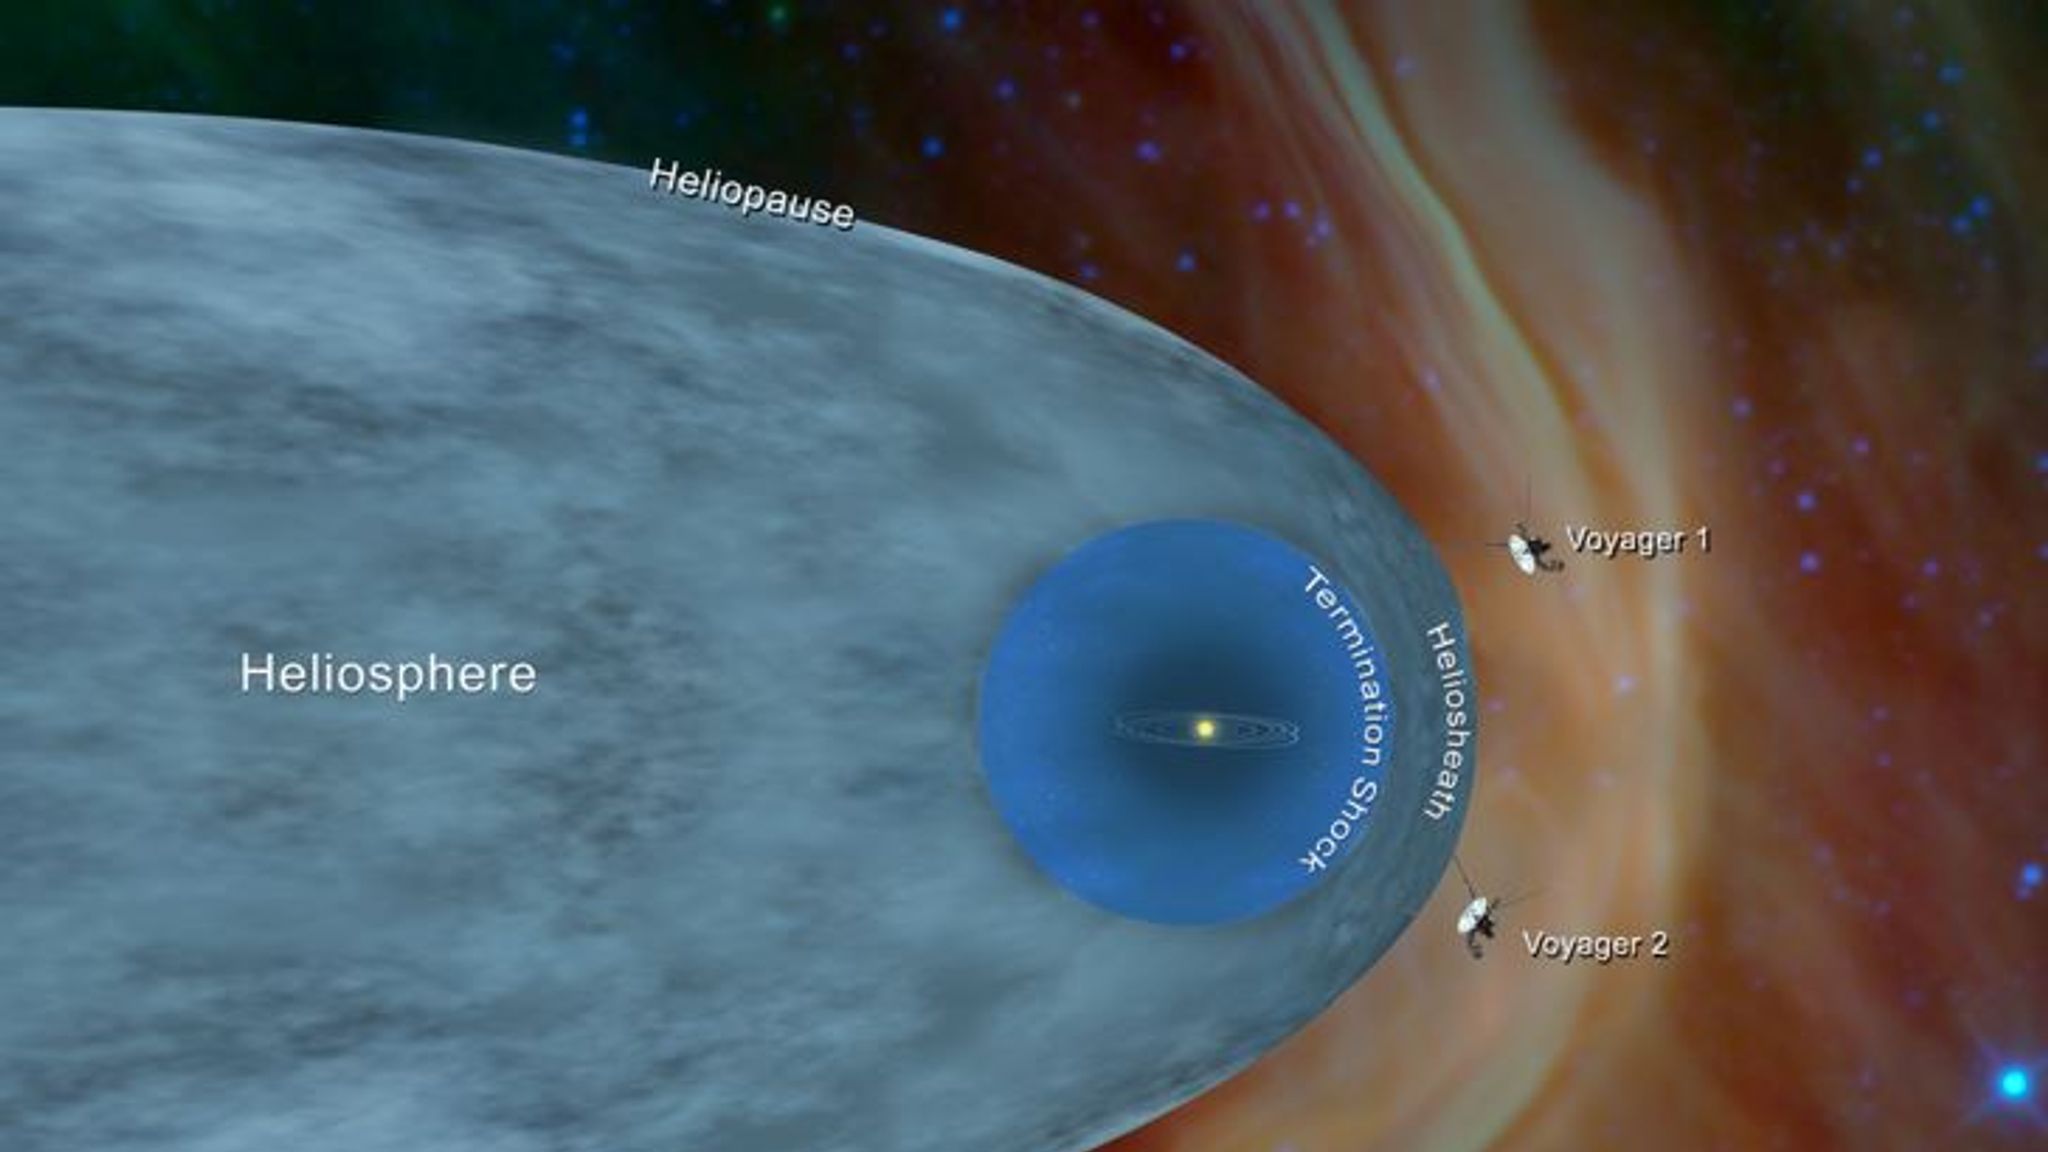 voyager 2 from earth